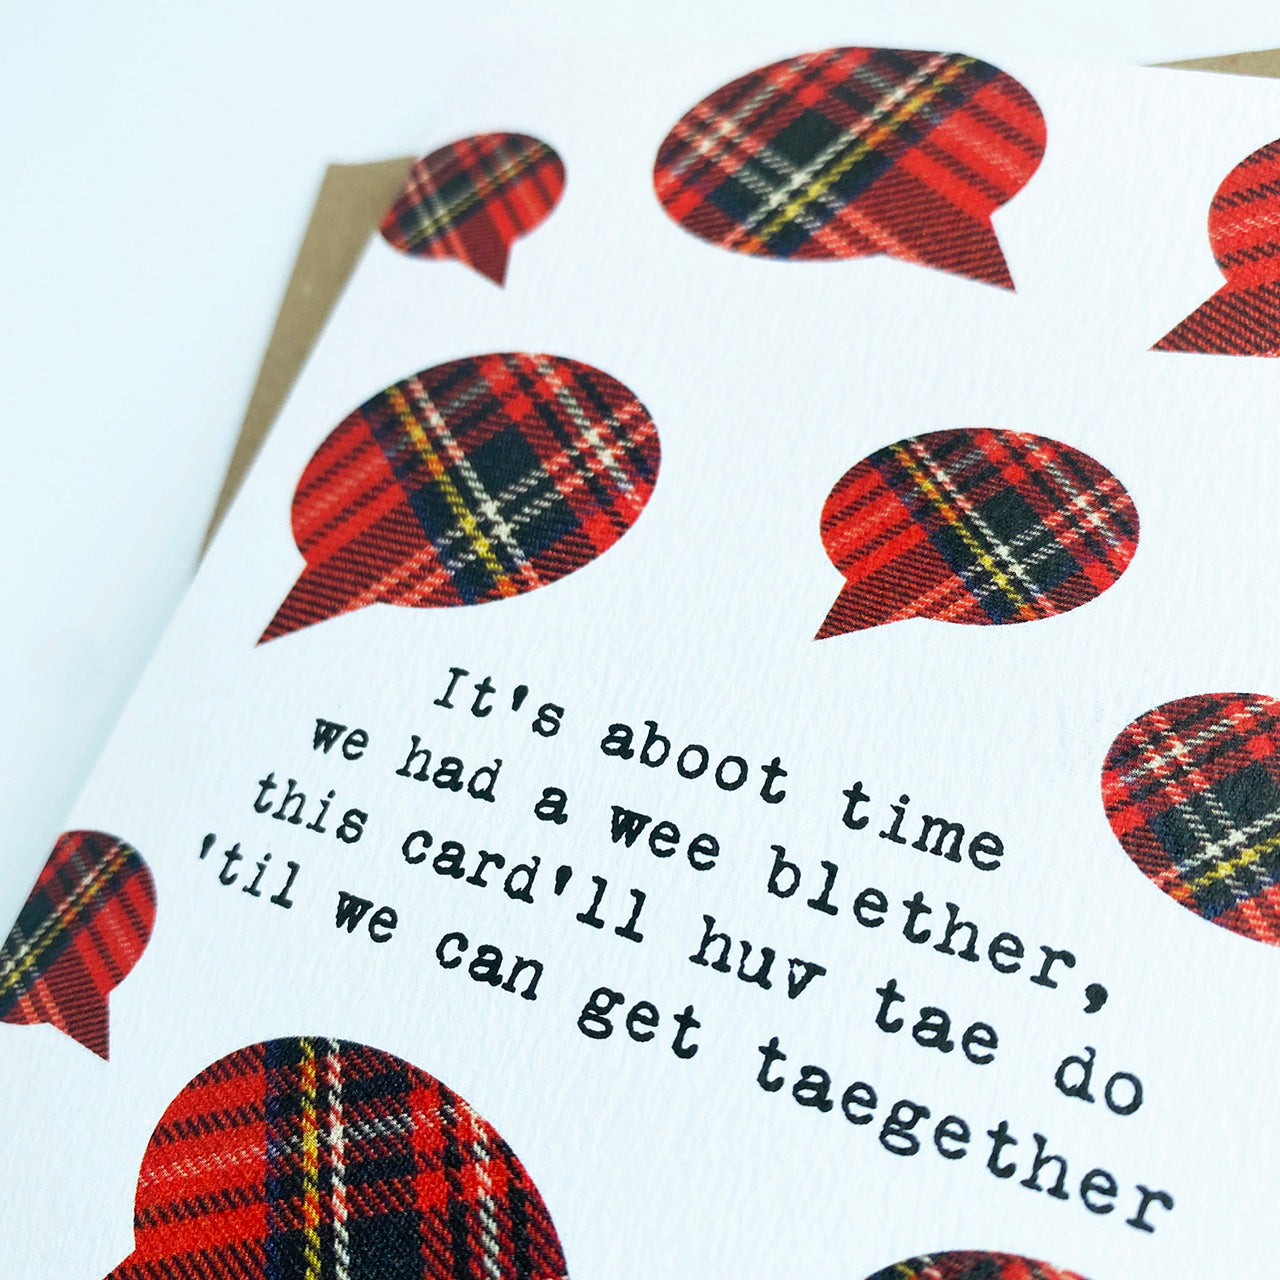 'A Wee Blether' Scottish Greeting Card - HiyaPal